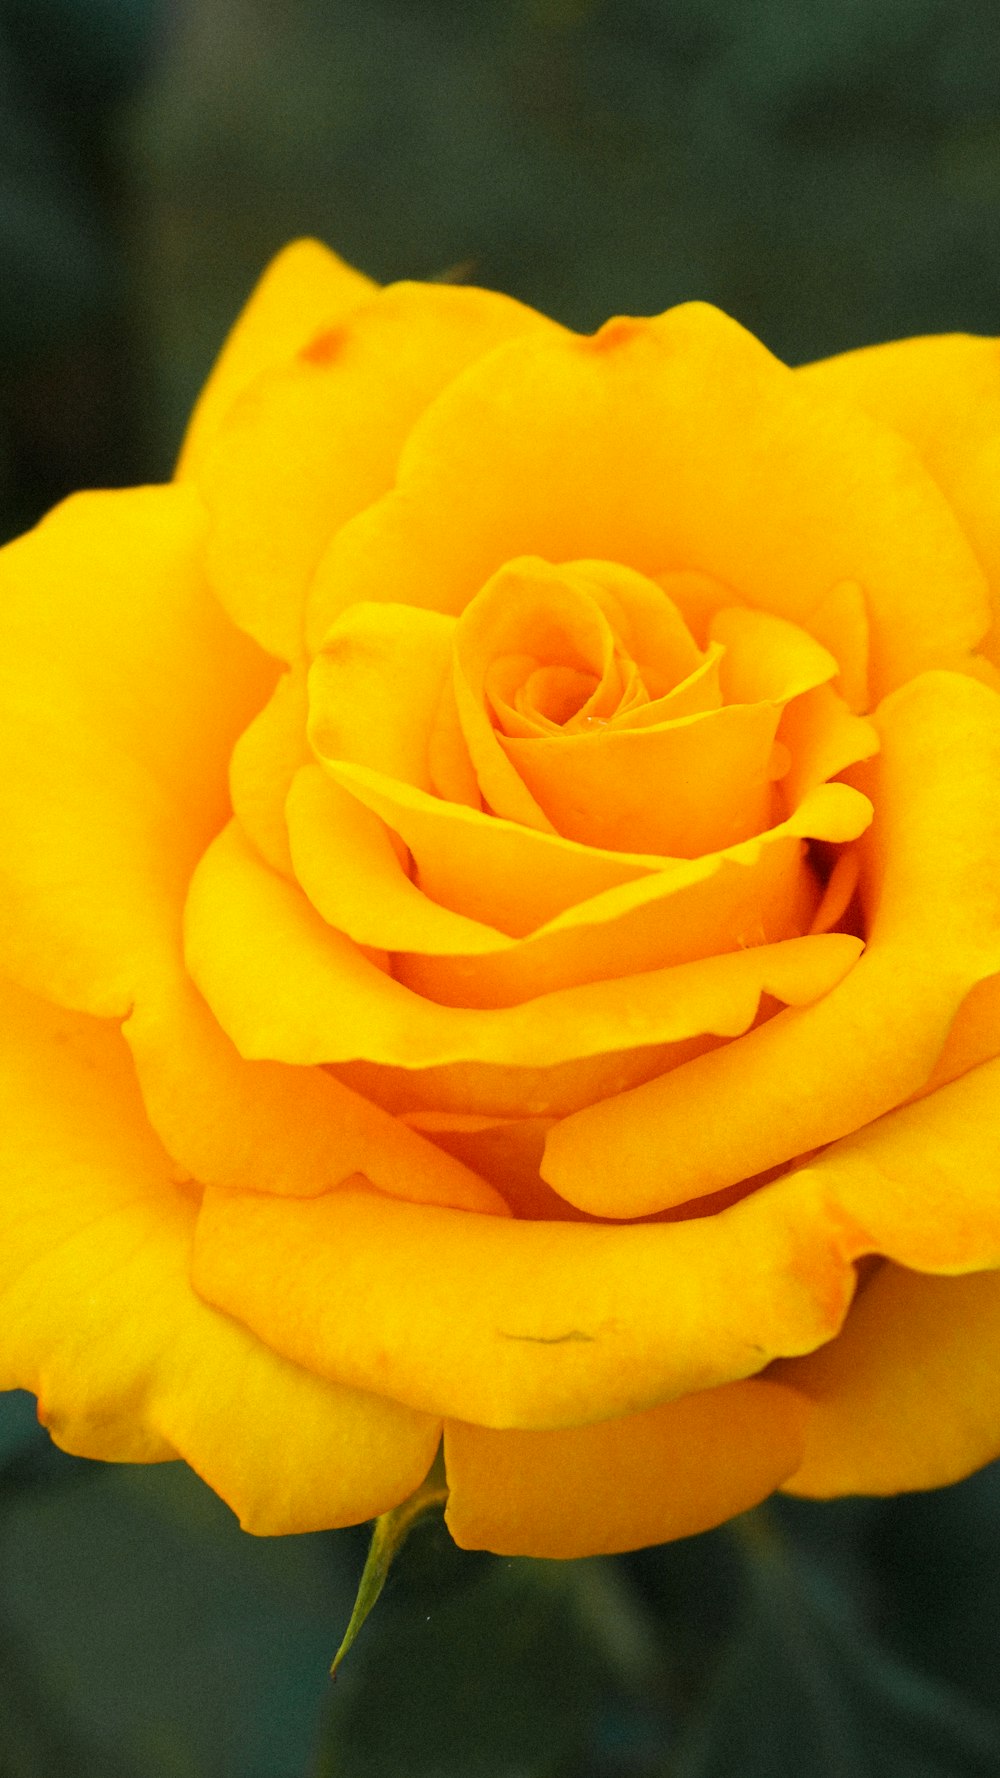 a close up of a yellow rose with a blurry background